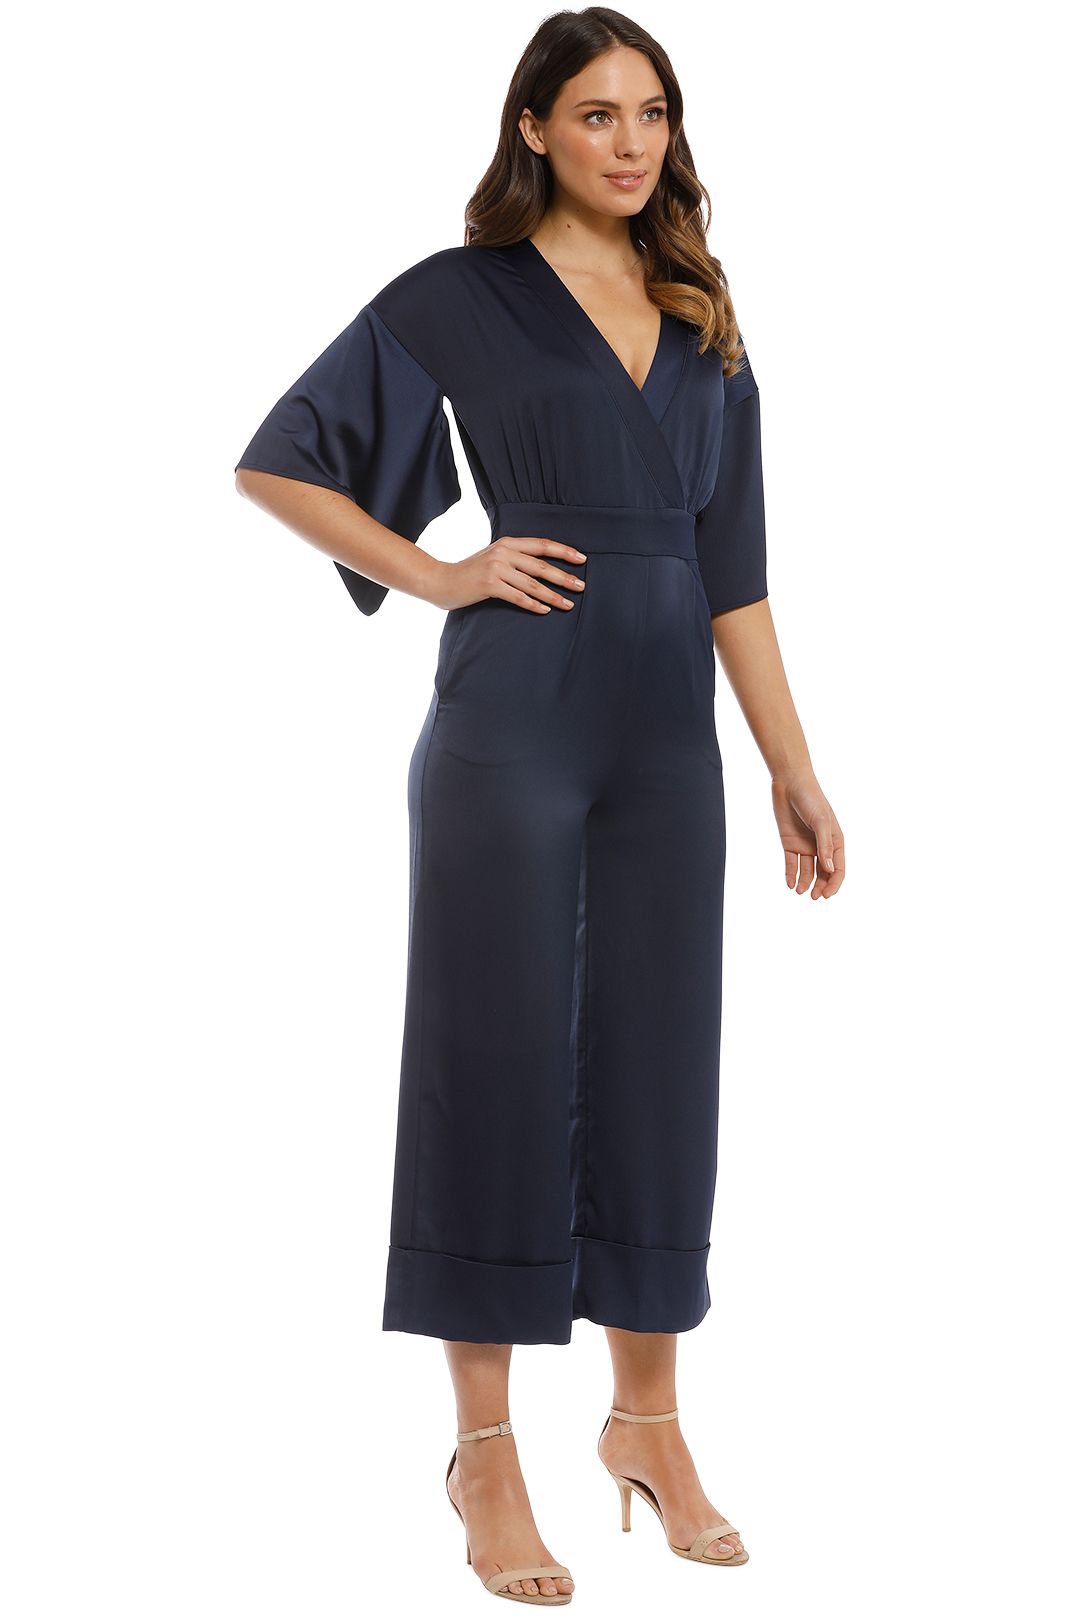 Iris and Ink - Sidney Satin Jumpsuit - Navy - Side